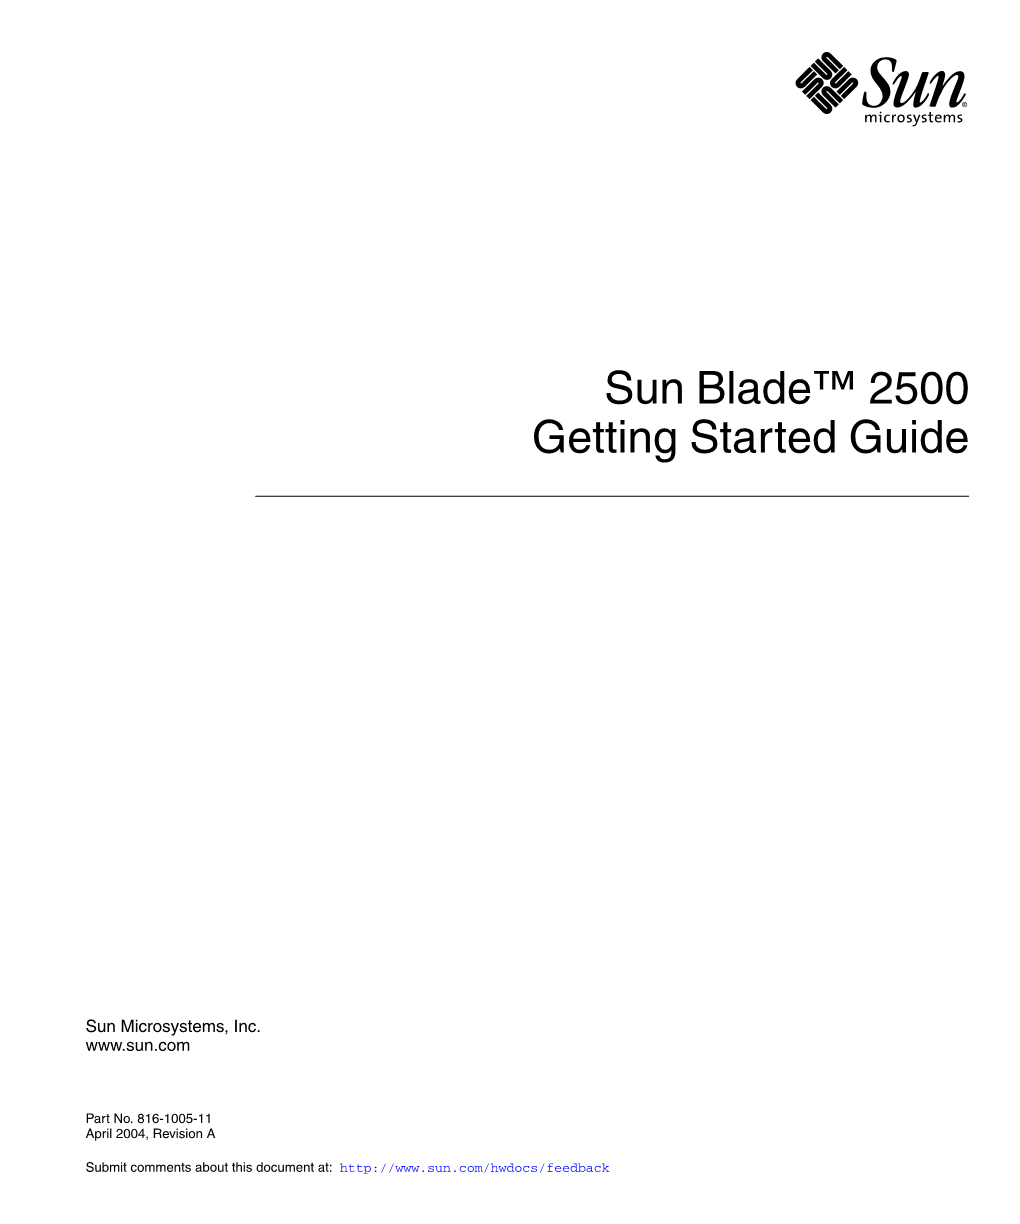 Sun Blade 2500 Getting Started Guide